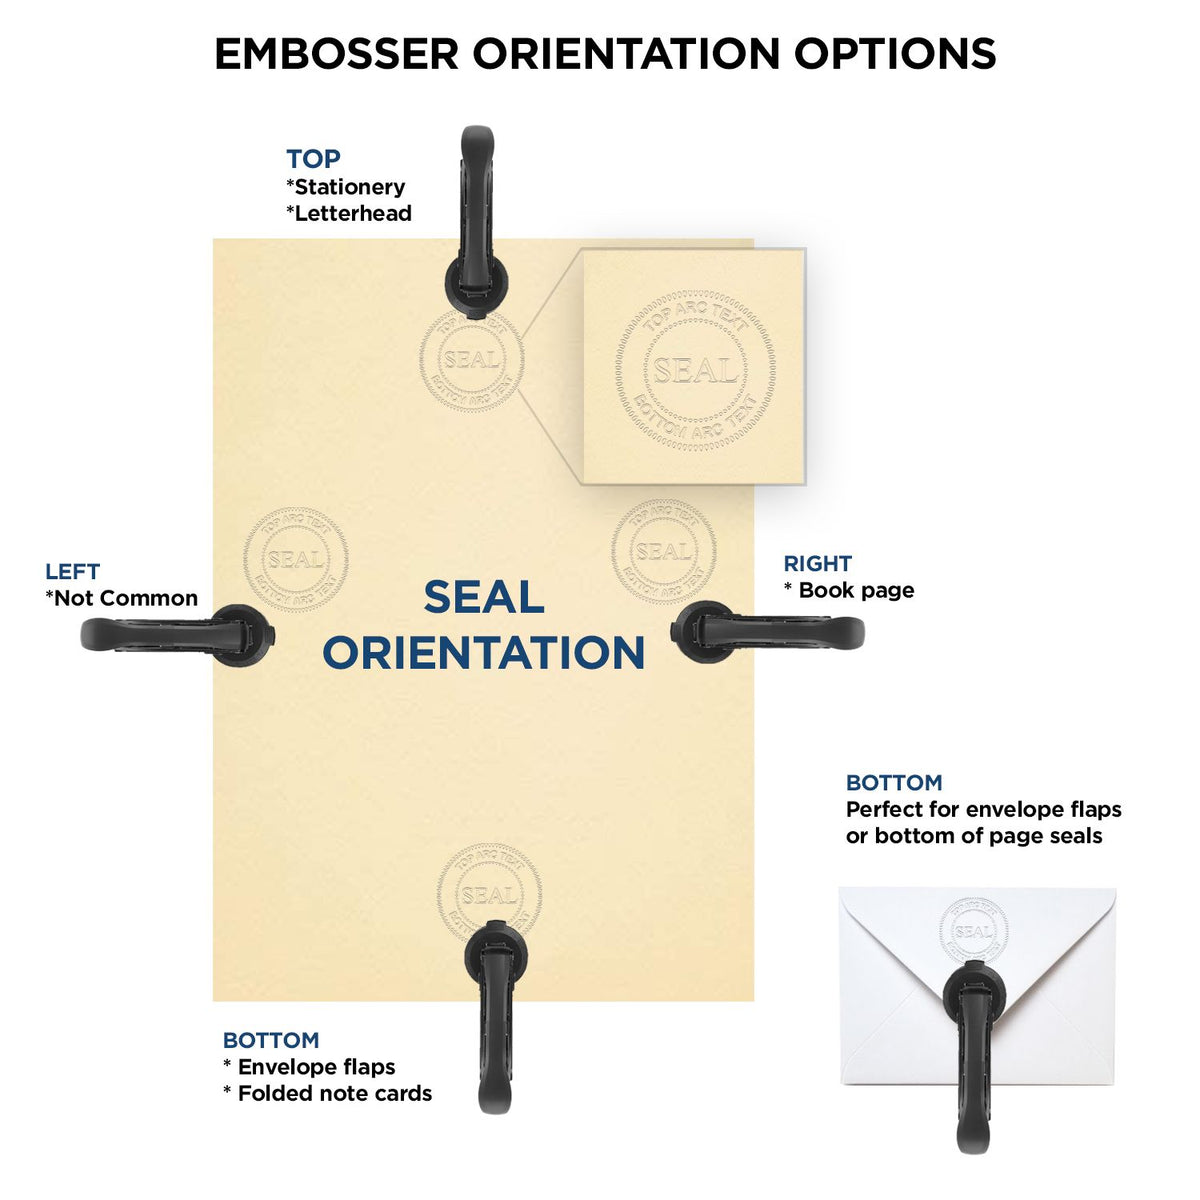 An infographic for the Maine Desk Architect Embossing Seal showing embosser orientation, this is showing examples of a top, bottom, right and left insert.